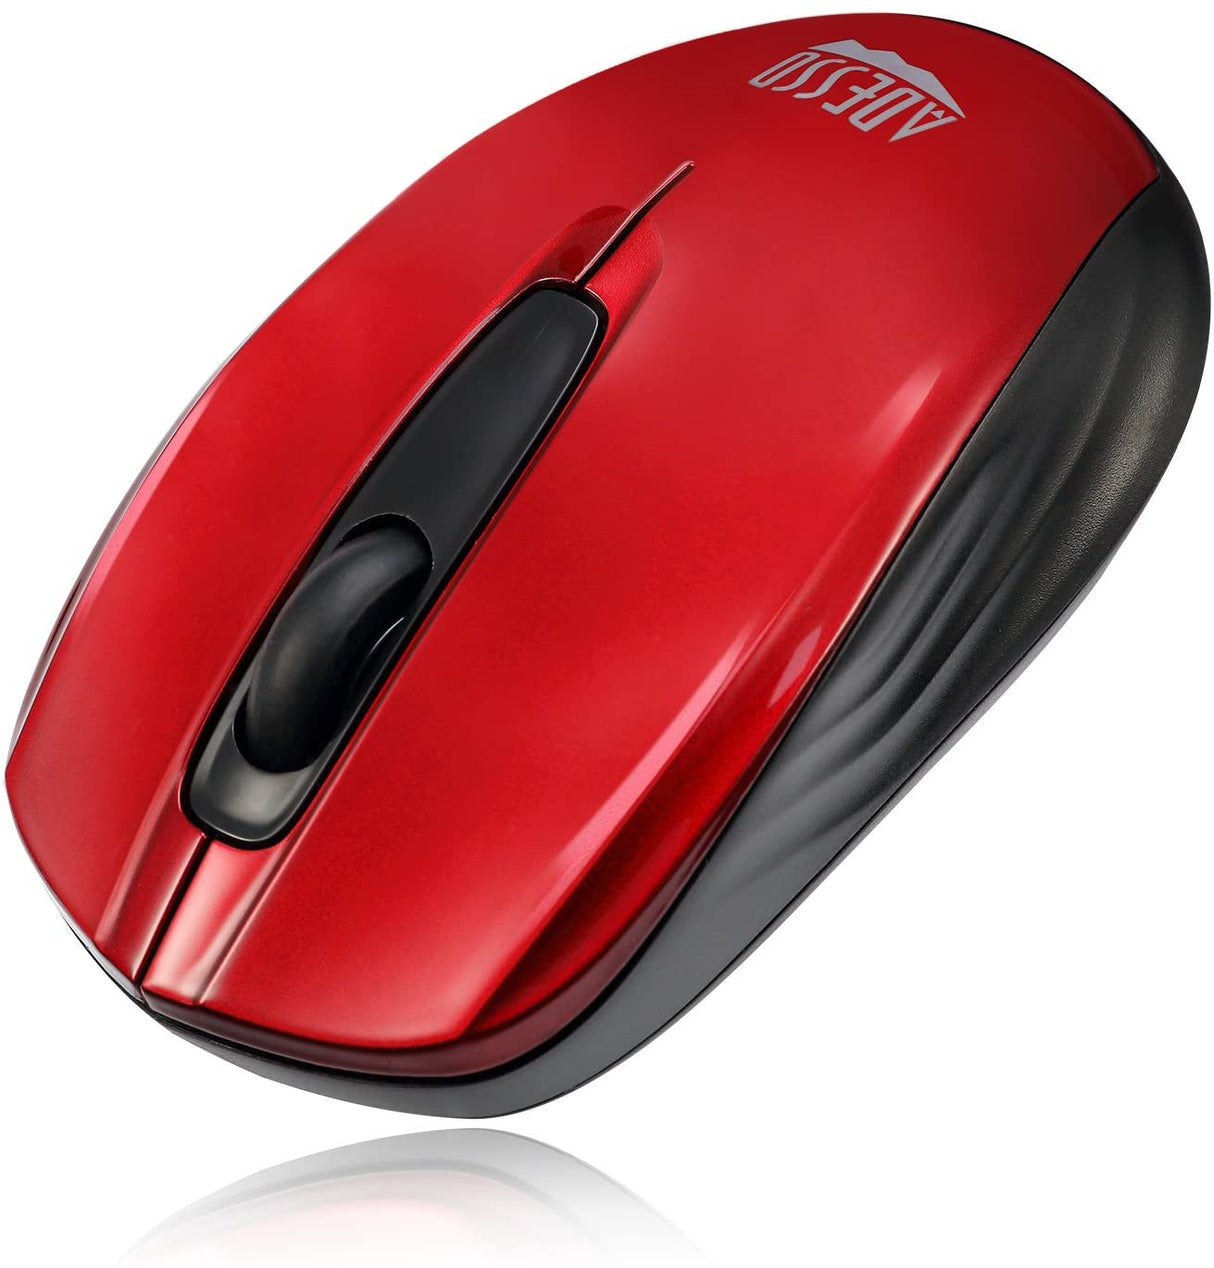 Adesso Ergonomic iMouse S50 - Wireless Optical Mouse (Red) - Dealtargets.com